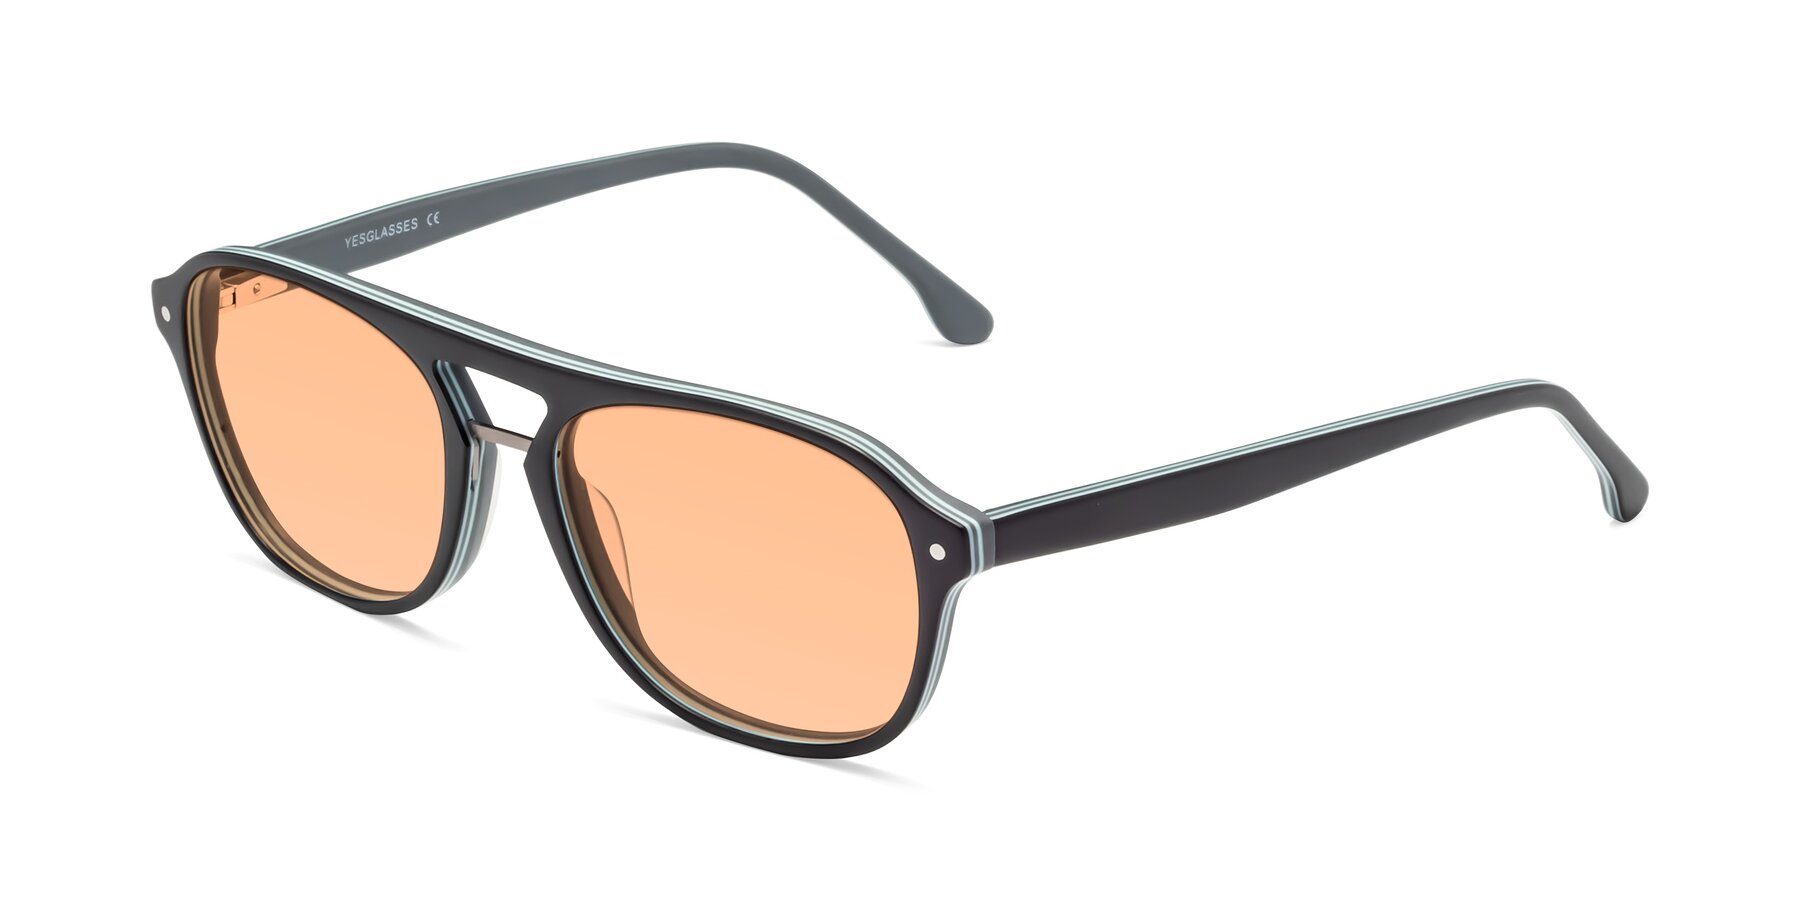 Angle of 17416 in Matte Black with Light Orange Tinted Lenses